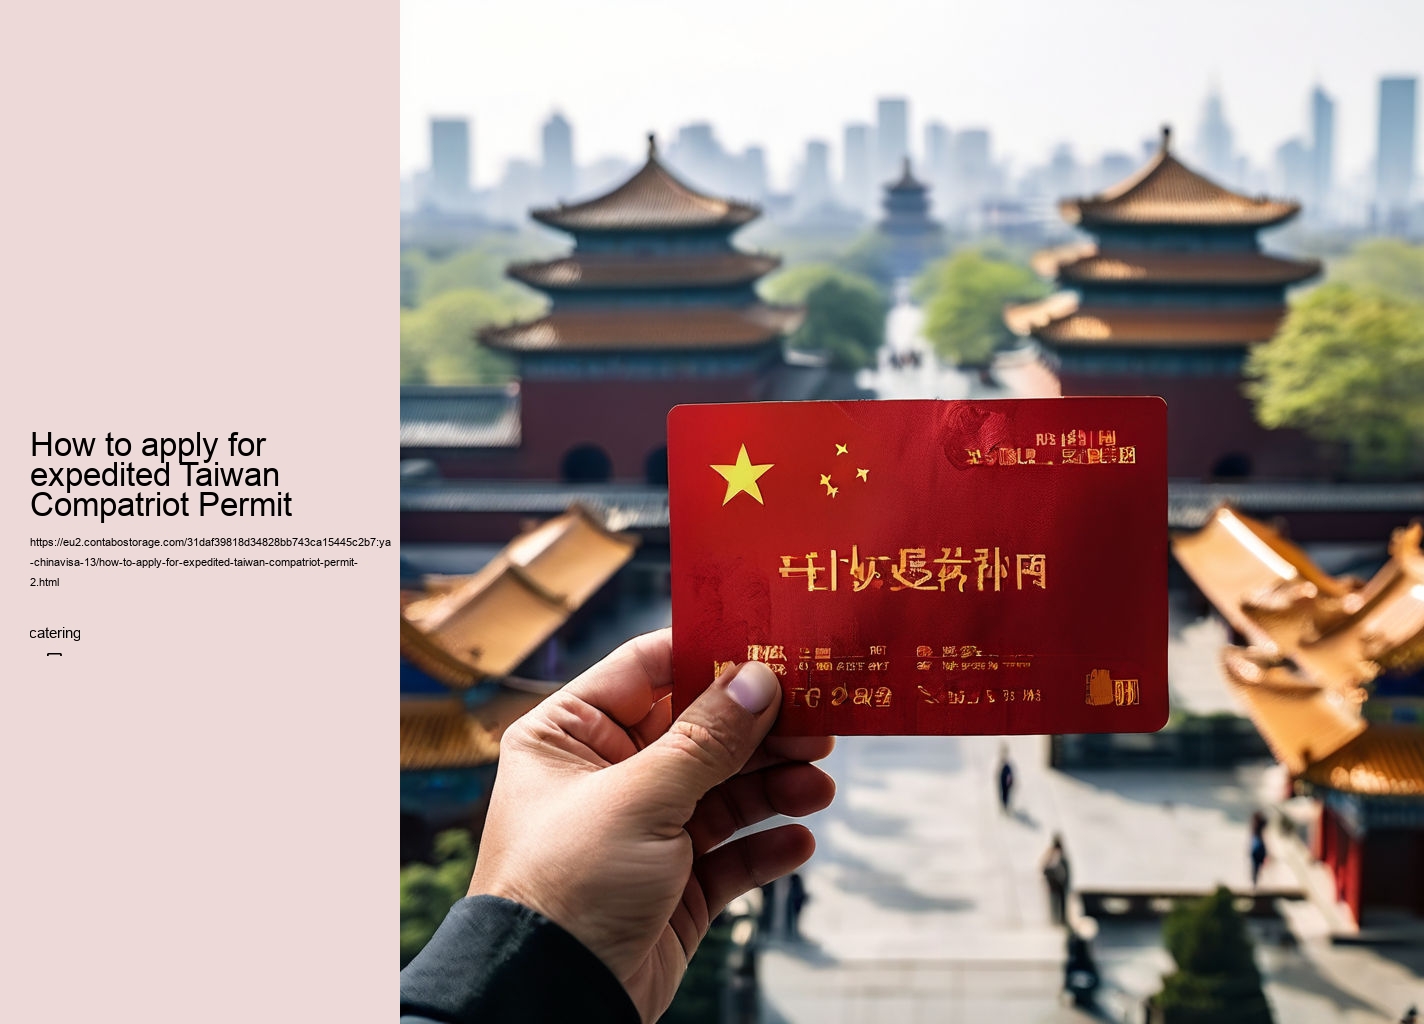 How to apply for expedited Taiwan Compatriot Permit